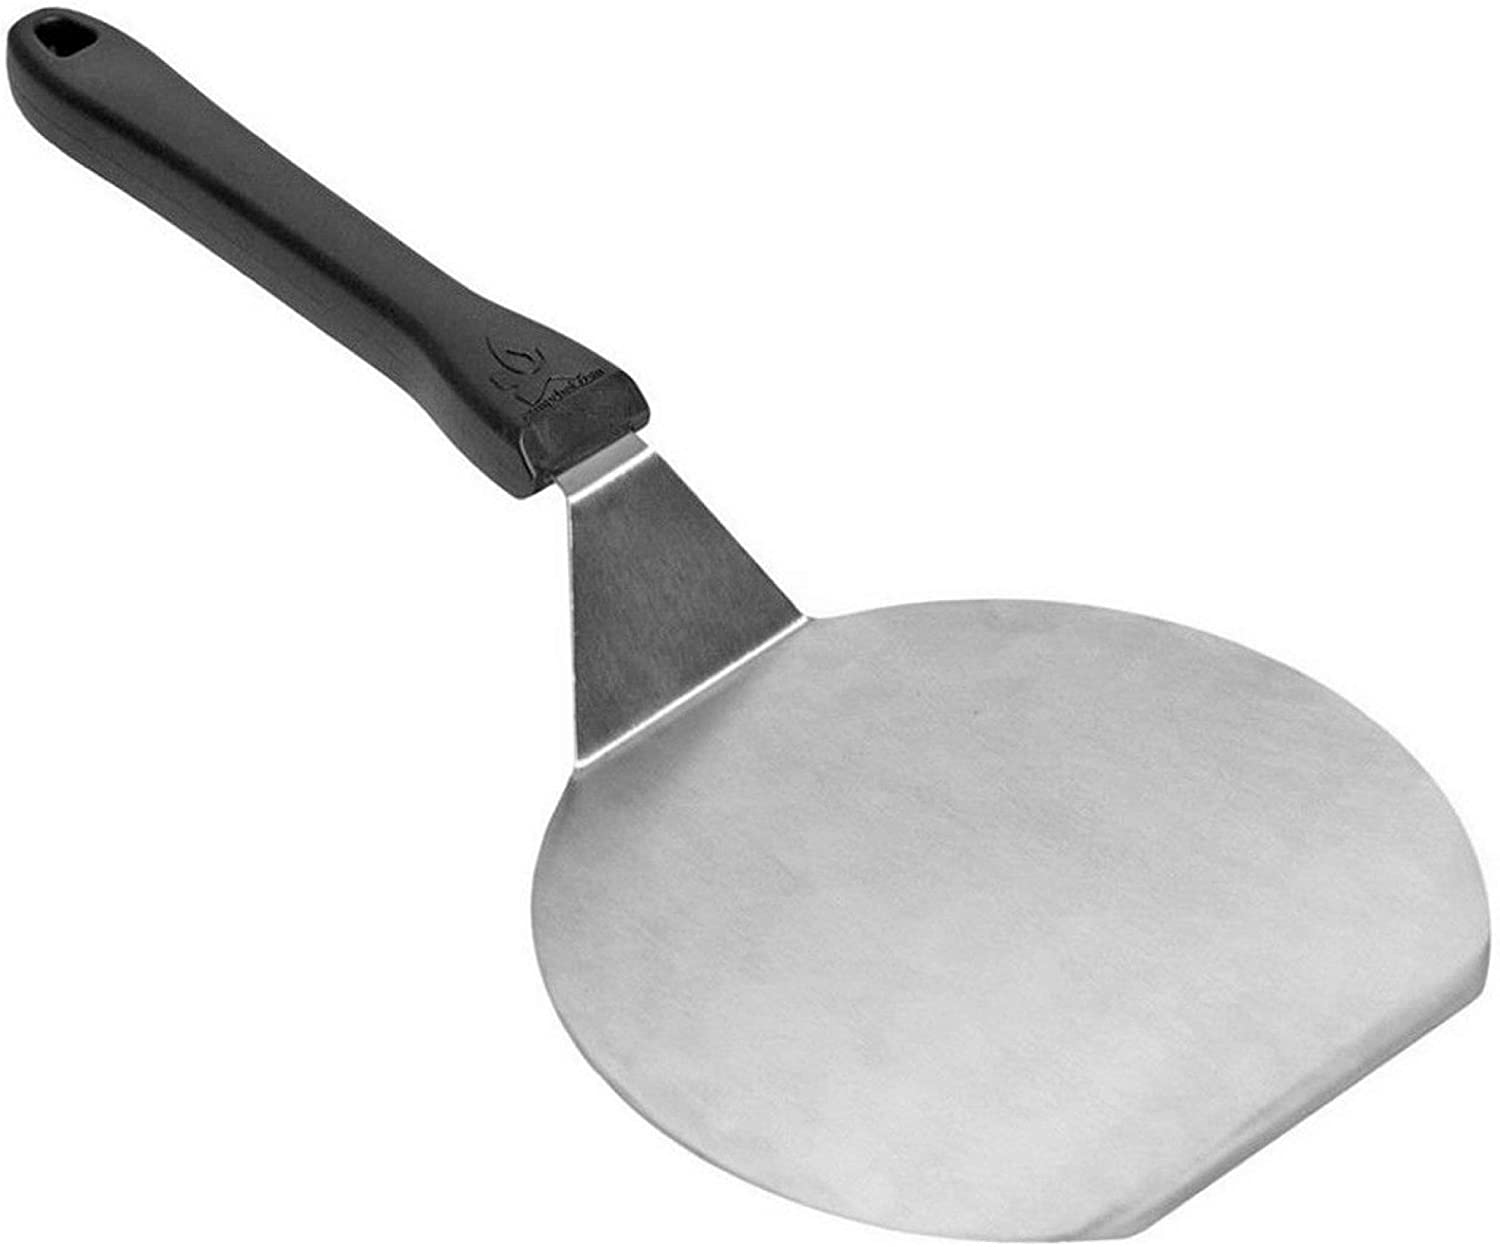 Camp Chef Large Rounded Pizza Spatula Stainless Steel with Long Handle Grip SPPZ - image 1 of 3